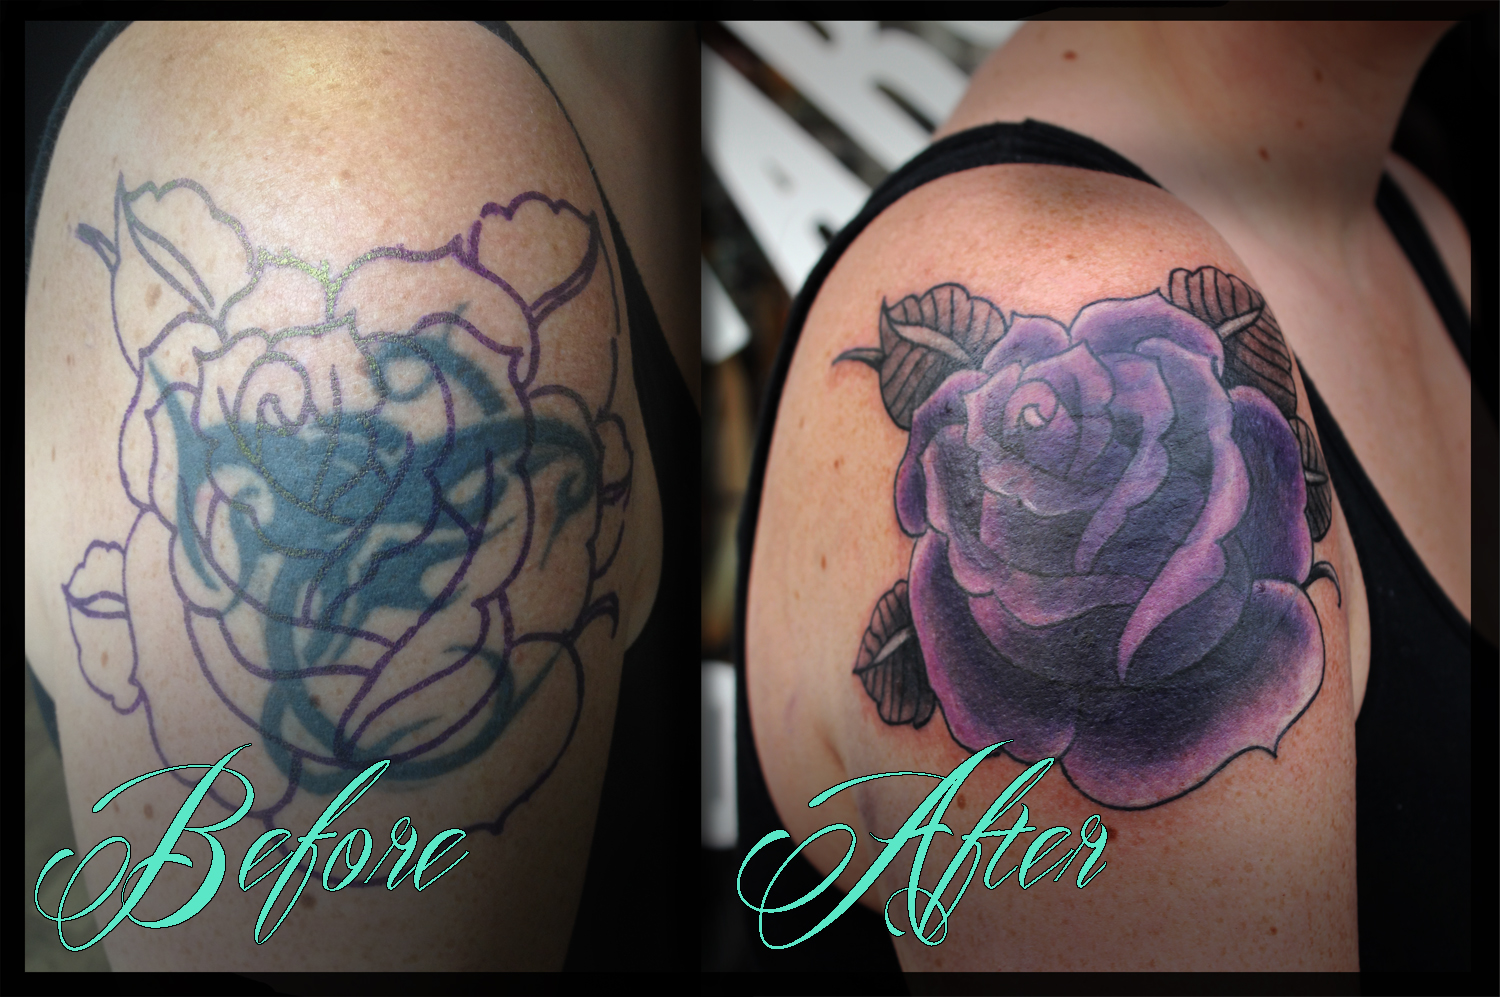 Cover Up Tattoos Designs, Ideas and Meaning | Tattoos For You